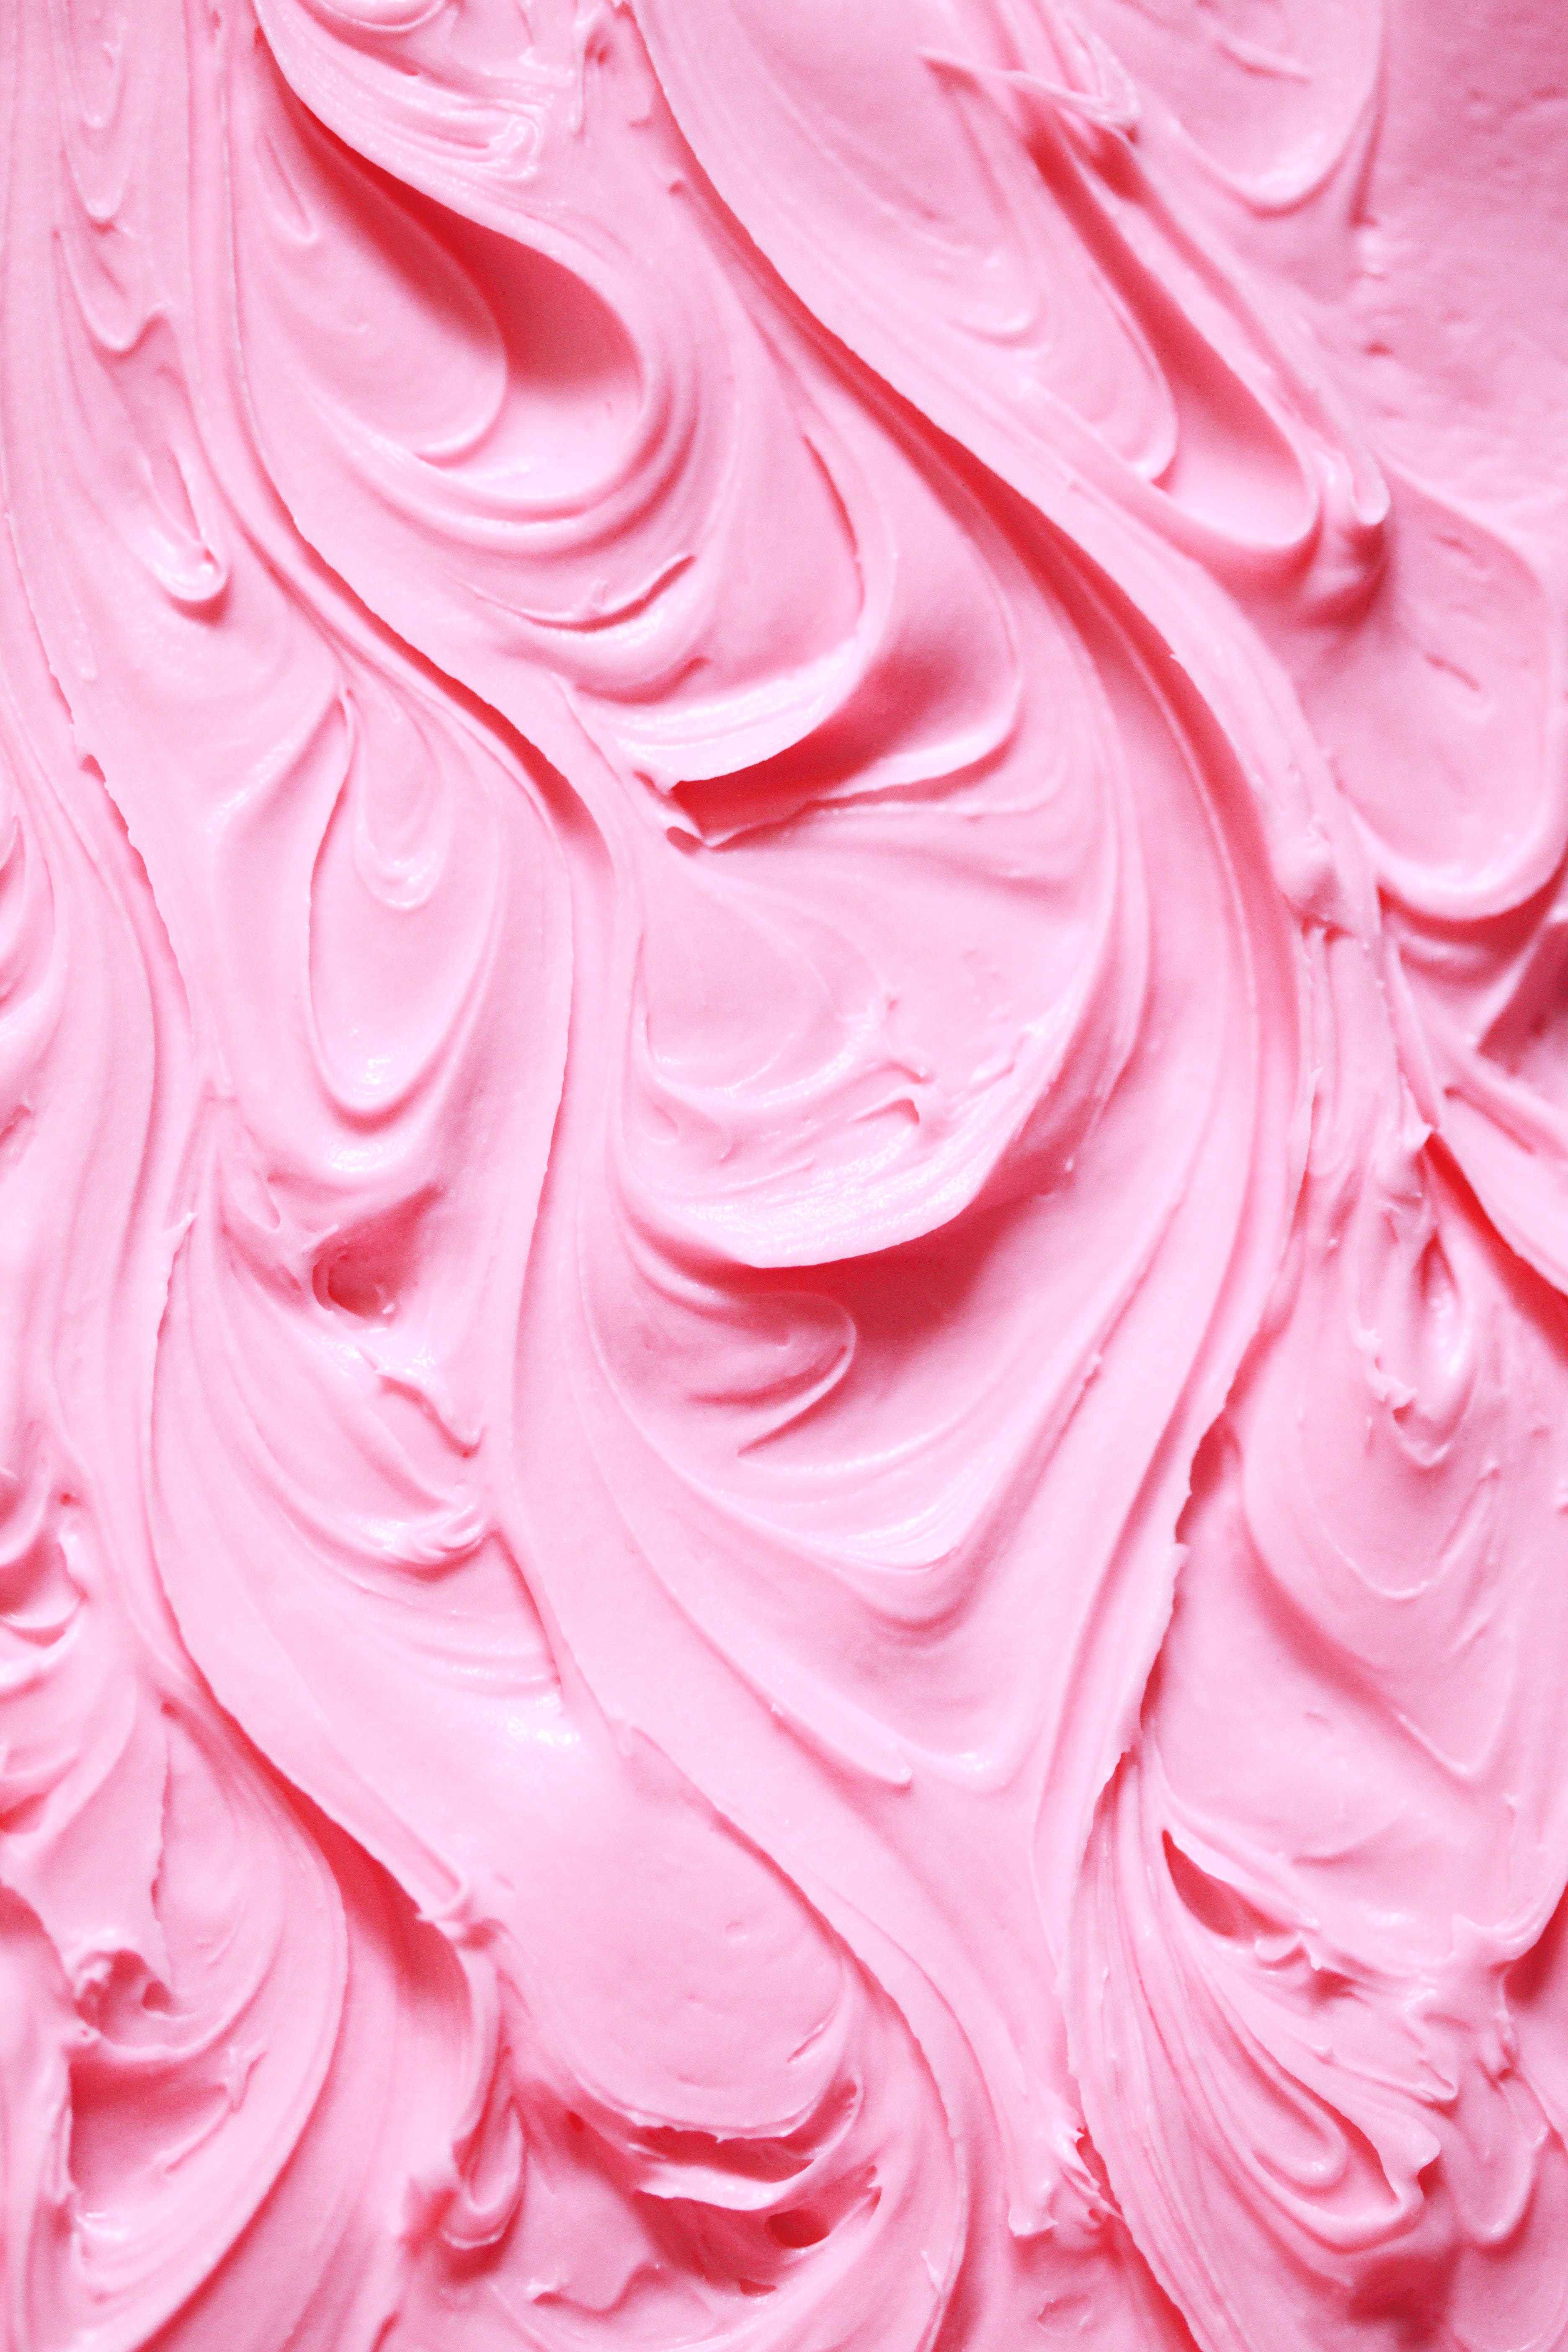 Pink Painting Wallpapers